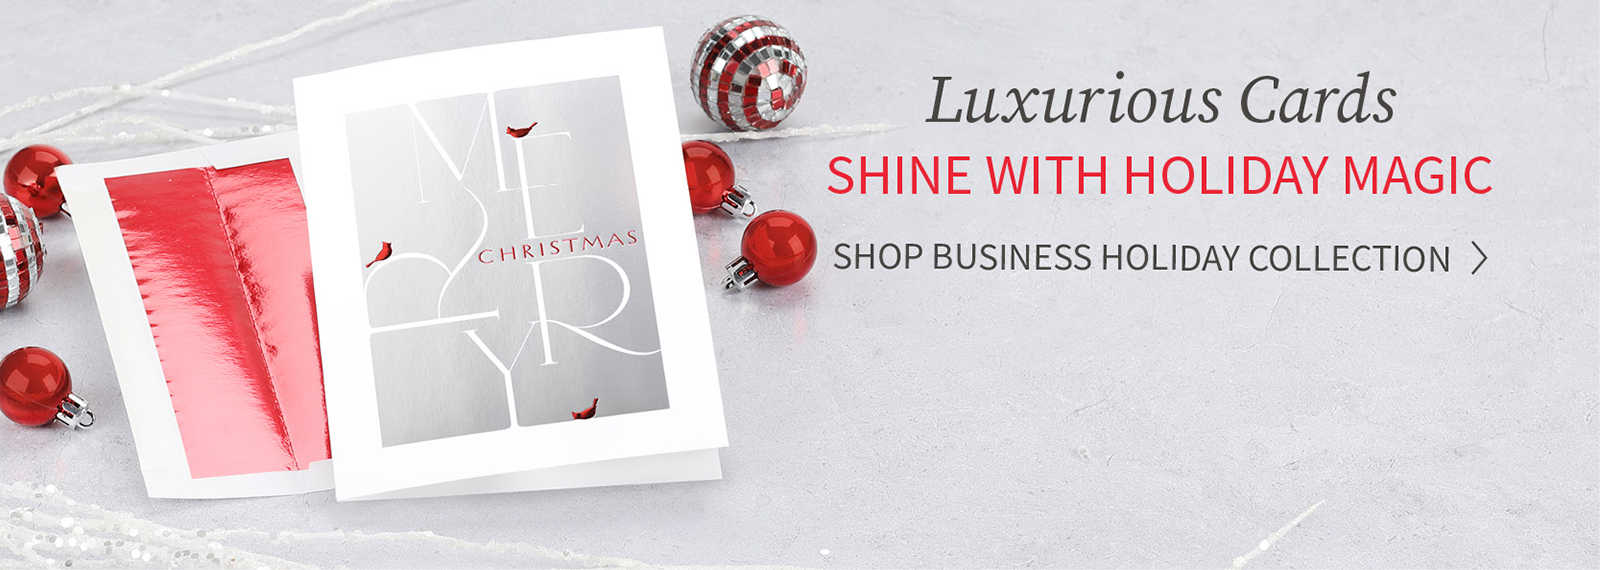 Business Holiday Collection banner